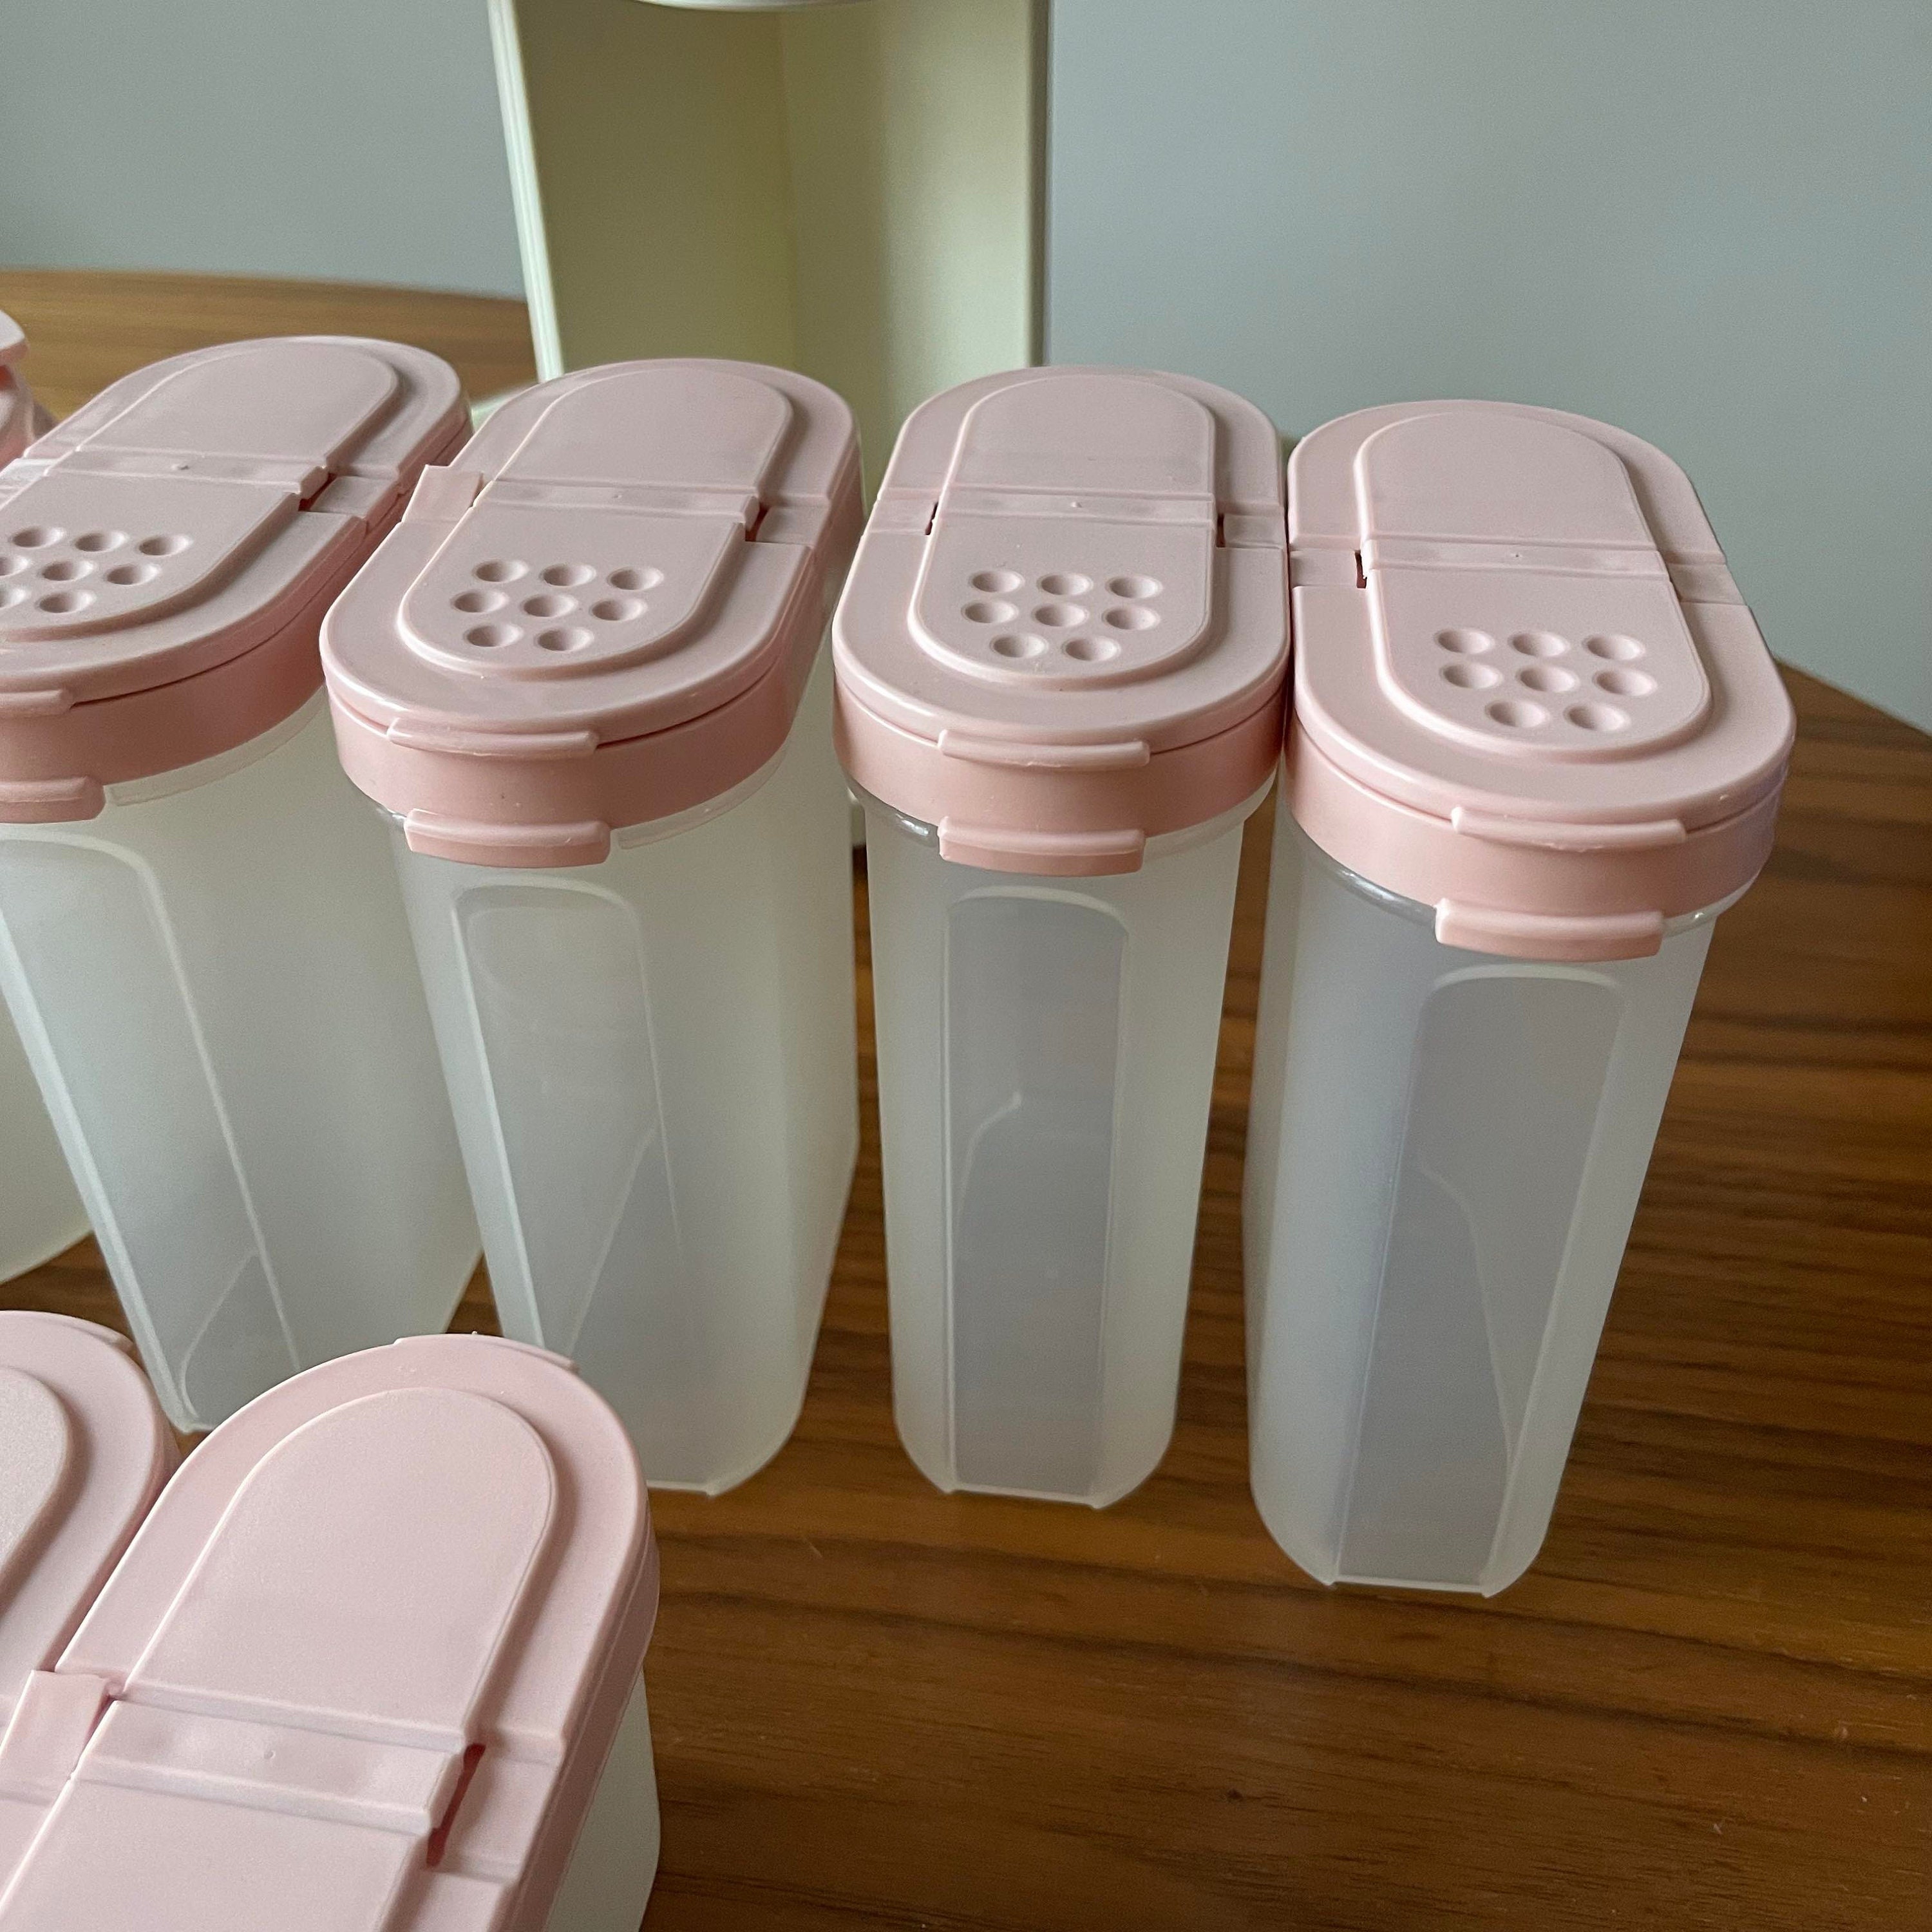 Tupperware Modular Mates Wall Mounted Spice Rack with Pink Lids - Ruby Lane